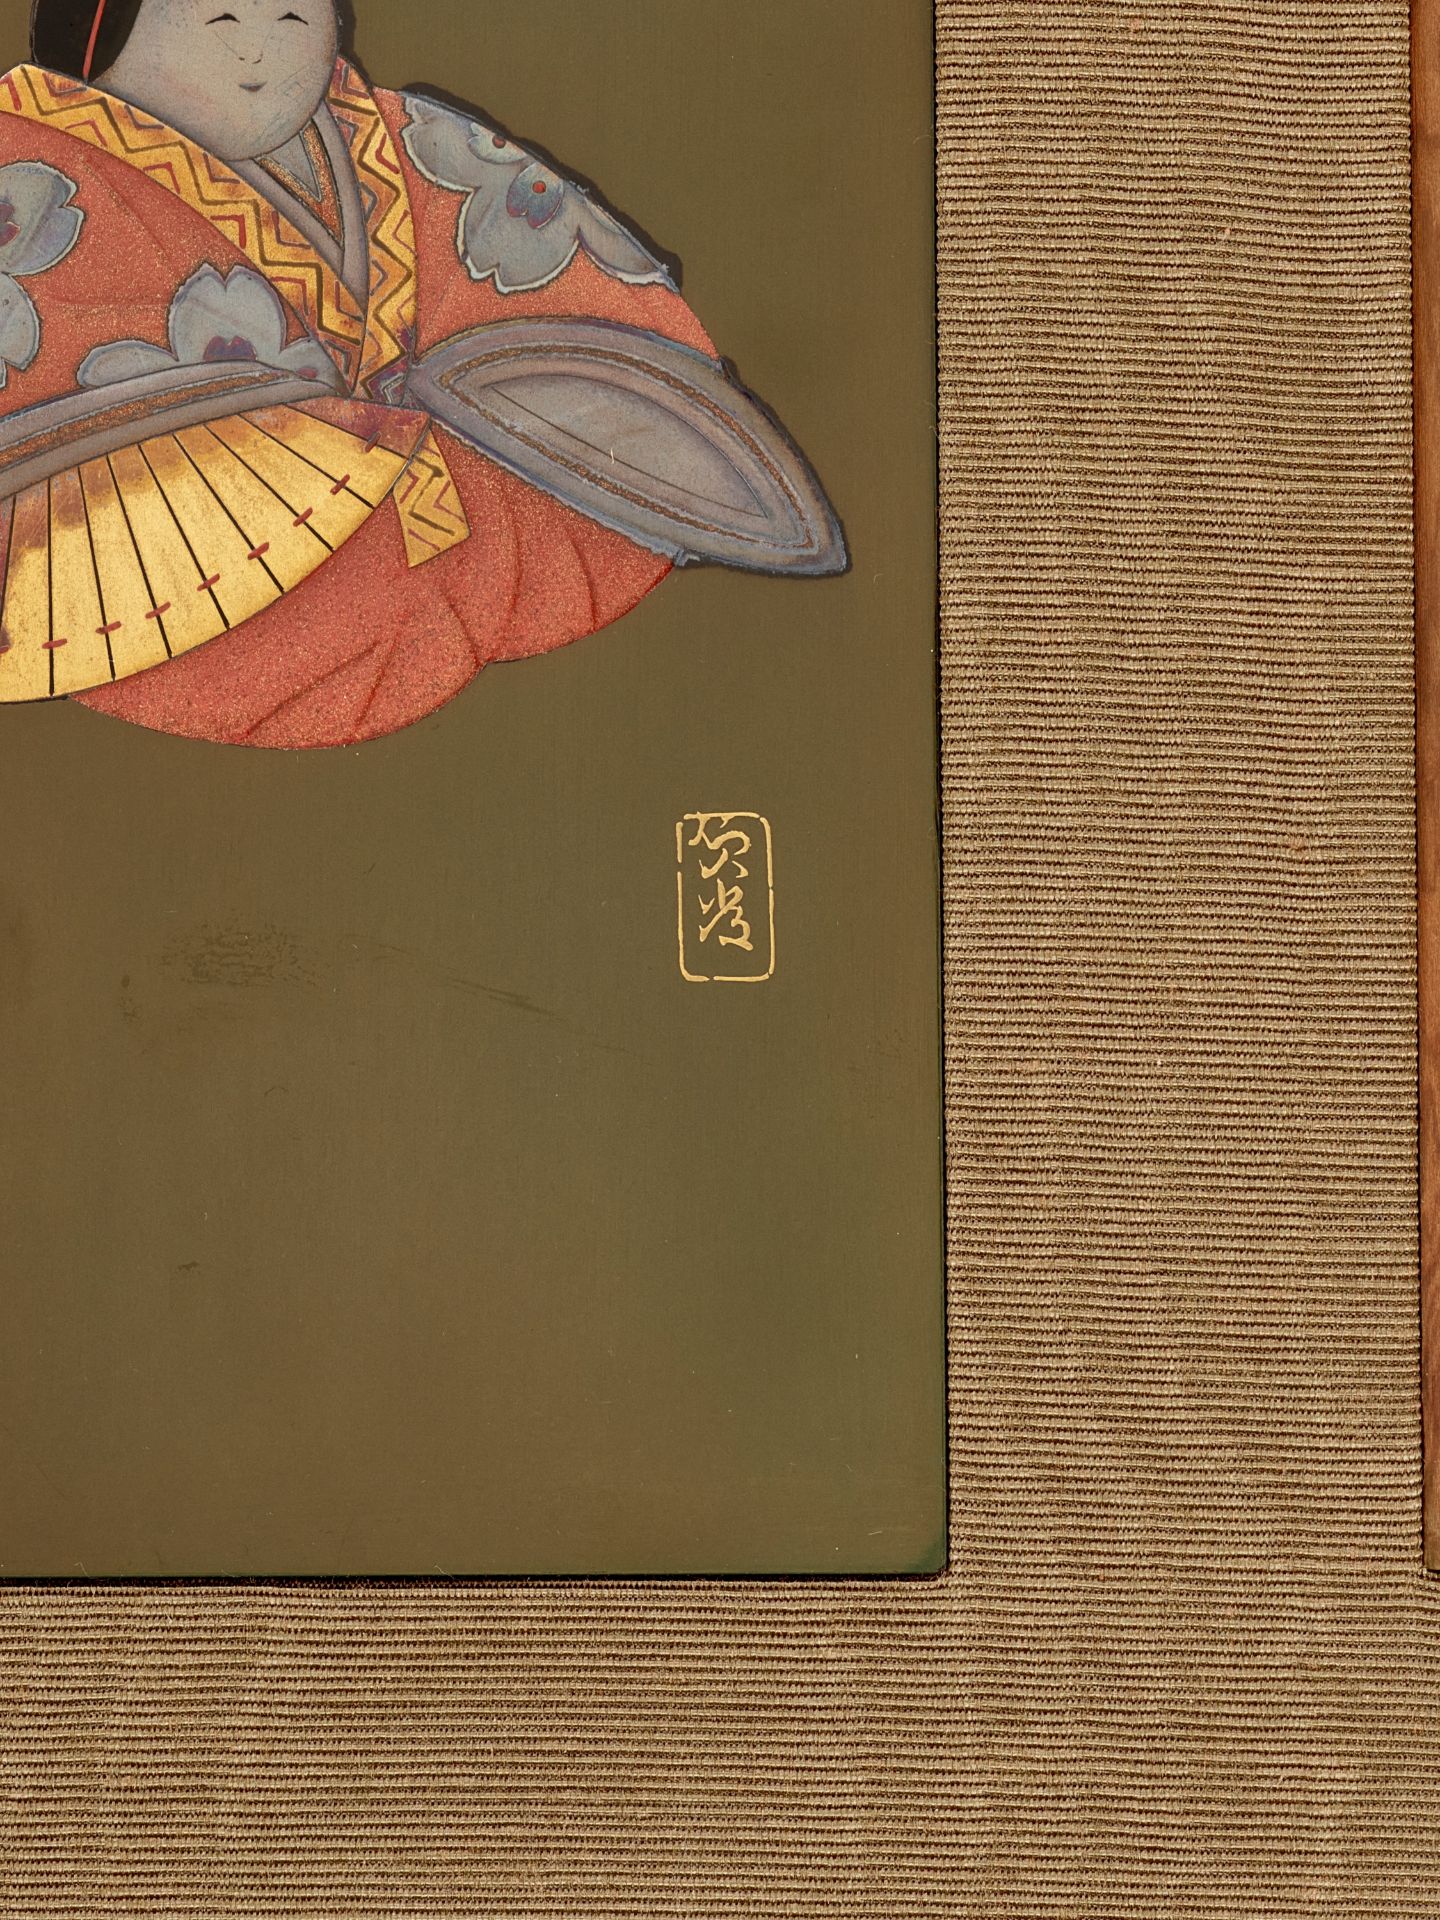 SADAATSU: A FINE ZESHIN-SCHOOL SET OF FIVE LACQUER TANZAKU (POEM CARDS) WITH FIVE FESTIVALS OF JAPAN - Image 14 of 15